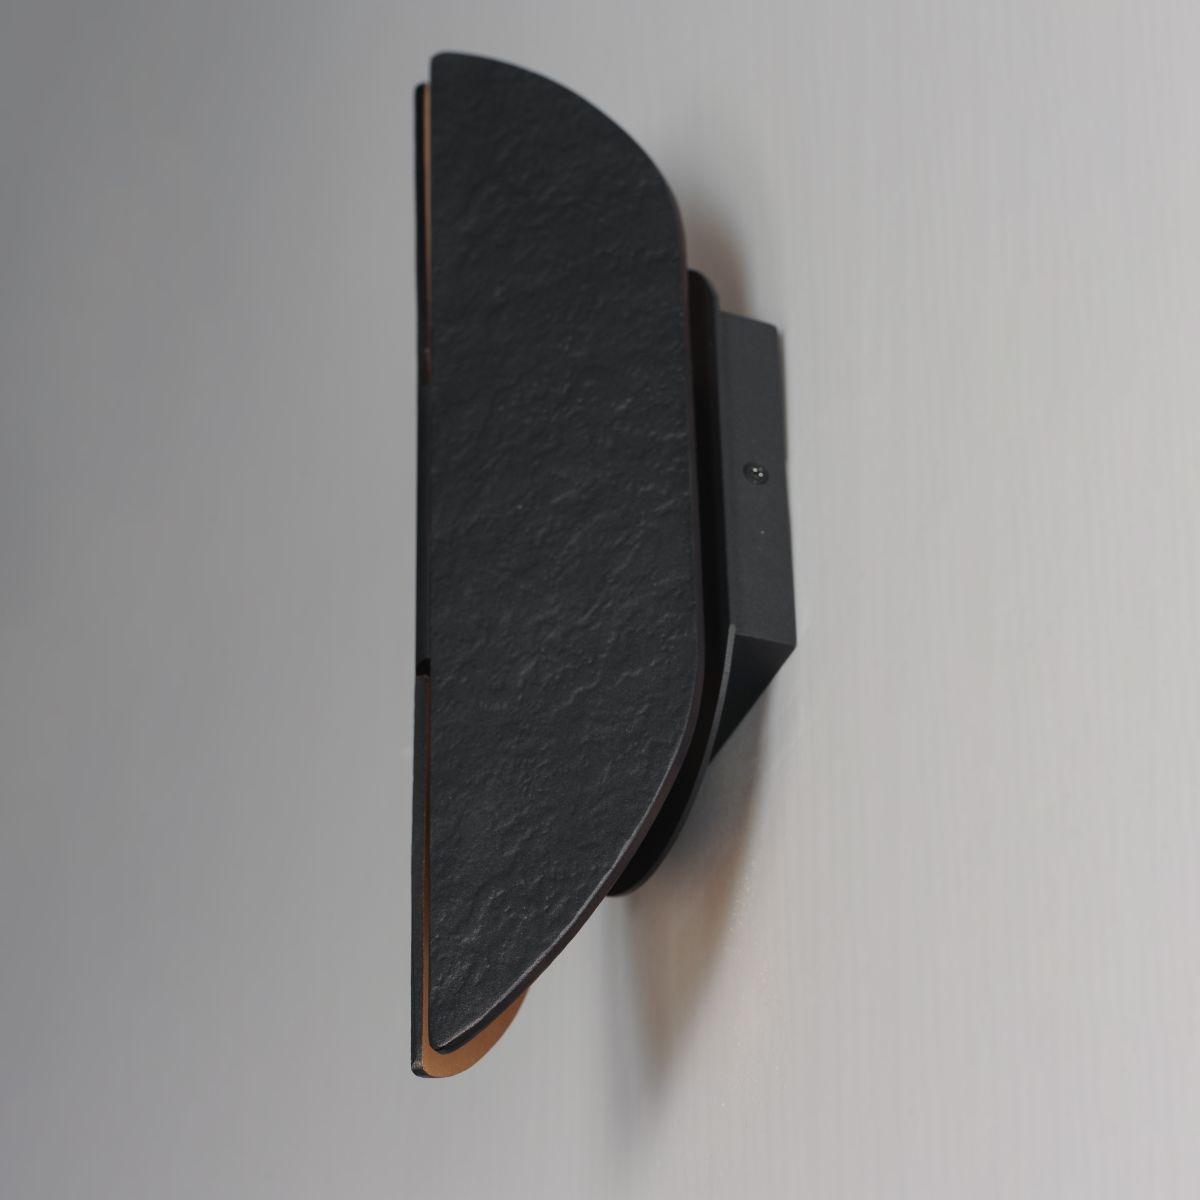 Tectonic 14 in. LED Outdoor Wall Sconce 3000K Black Finish